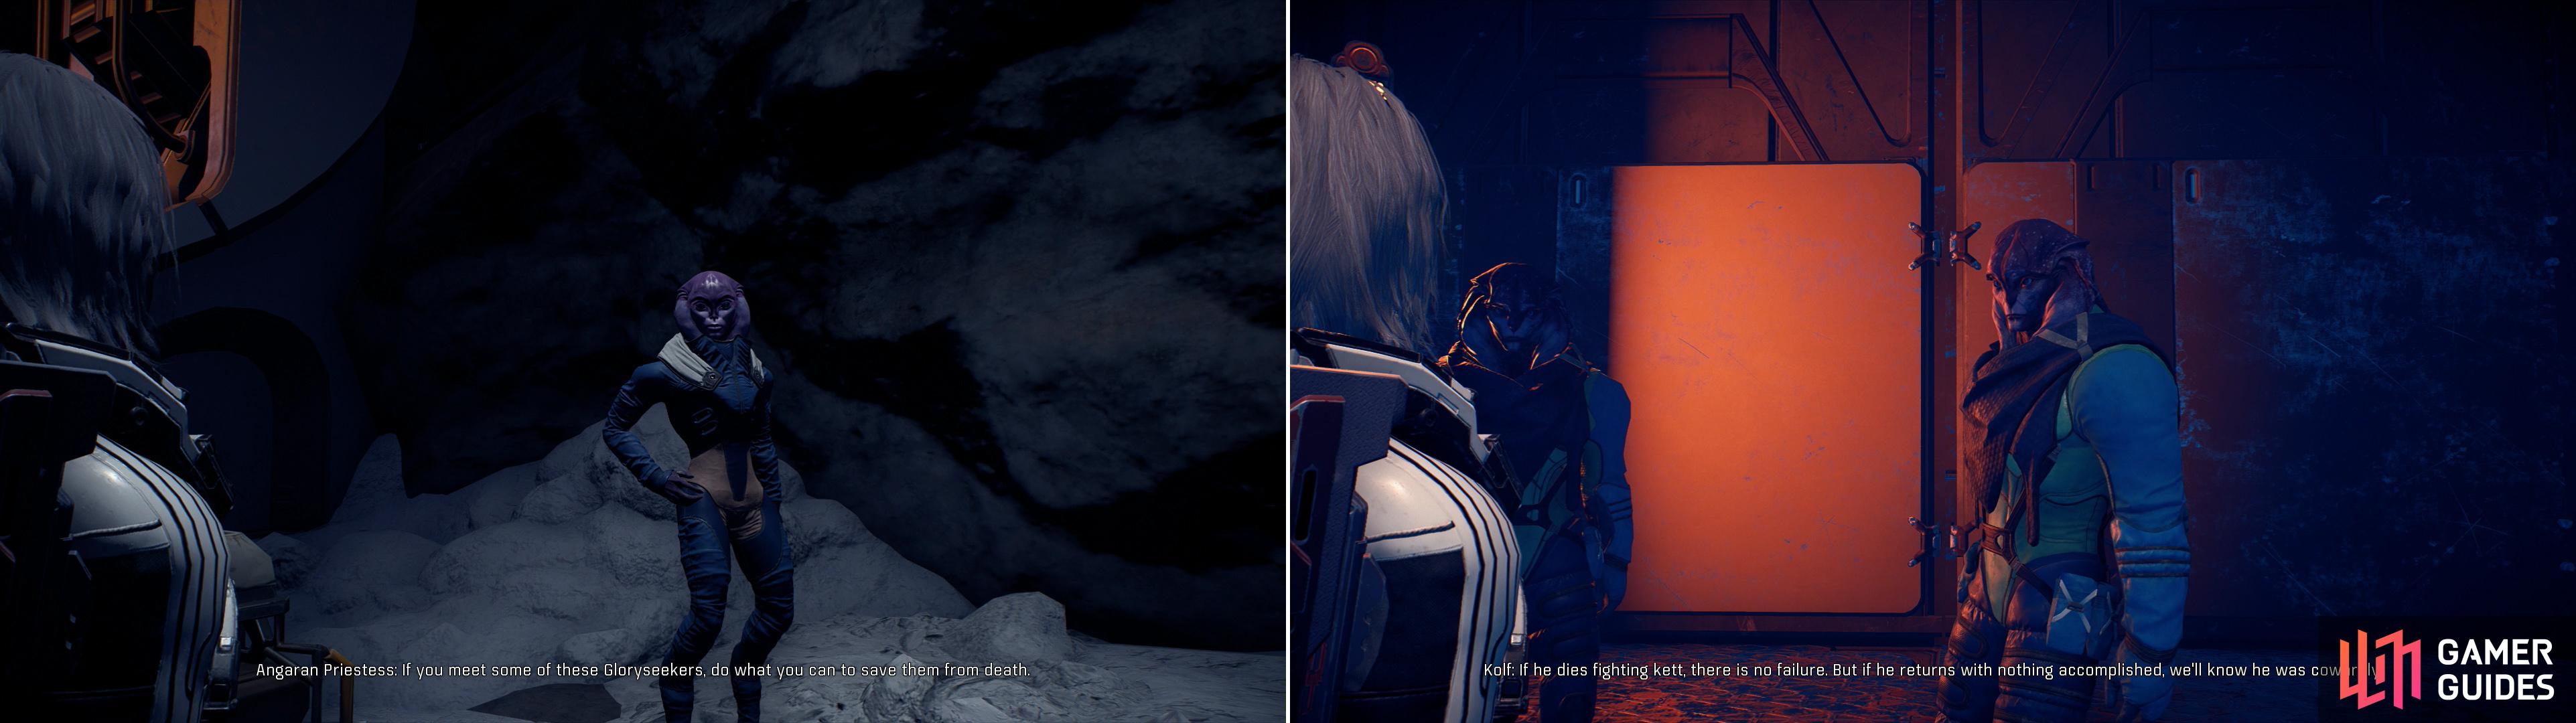 Talk to the Angaran Priestess in the Resistance Base (left) then head to the Techiix Station to find the aforementioned Gloryseekers (right).